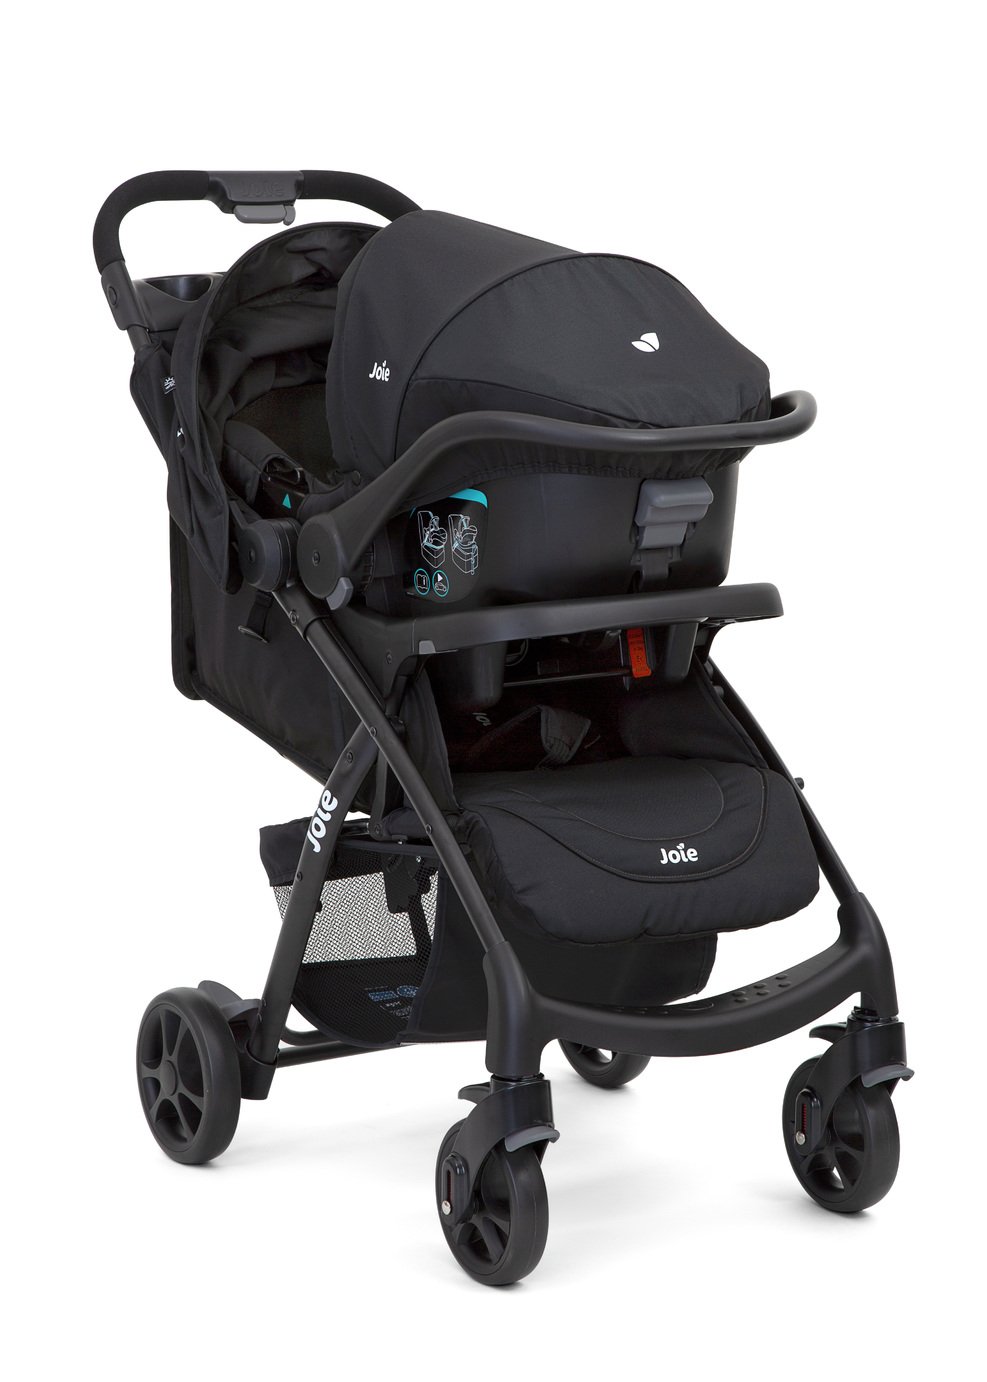 joie travel system reviews